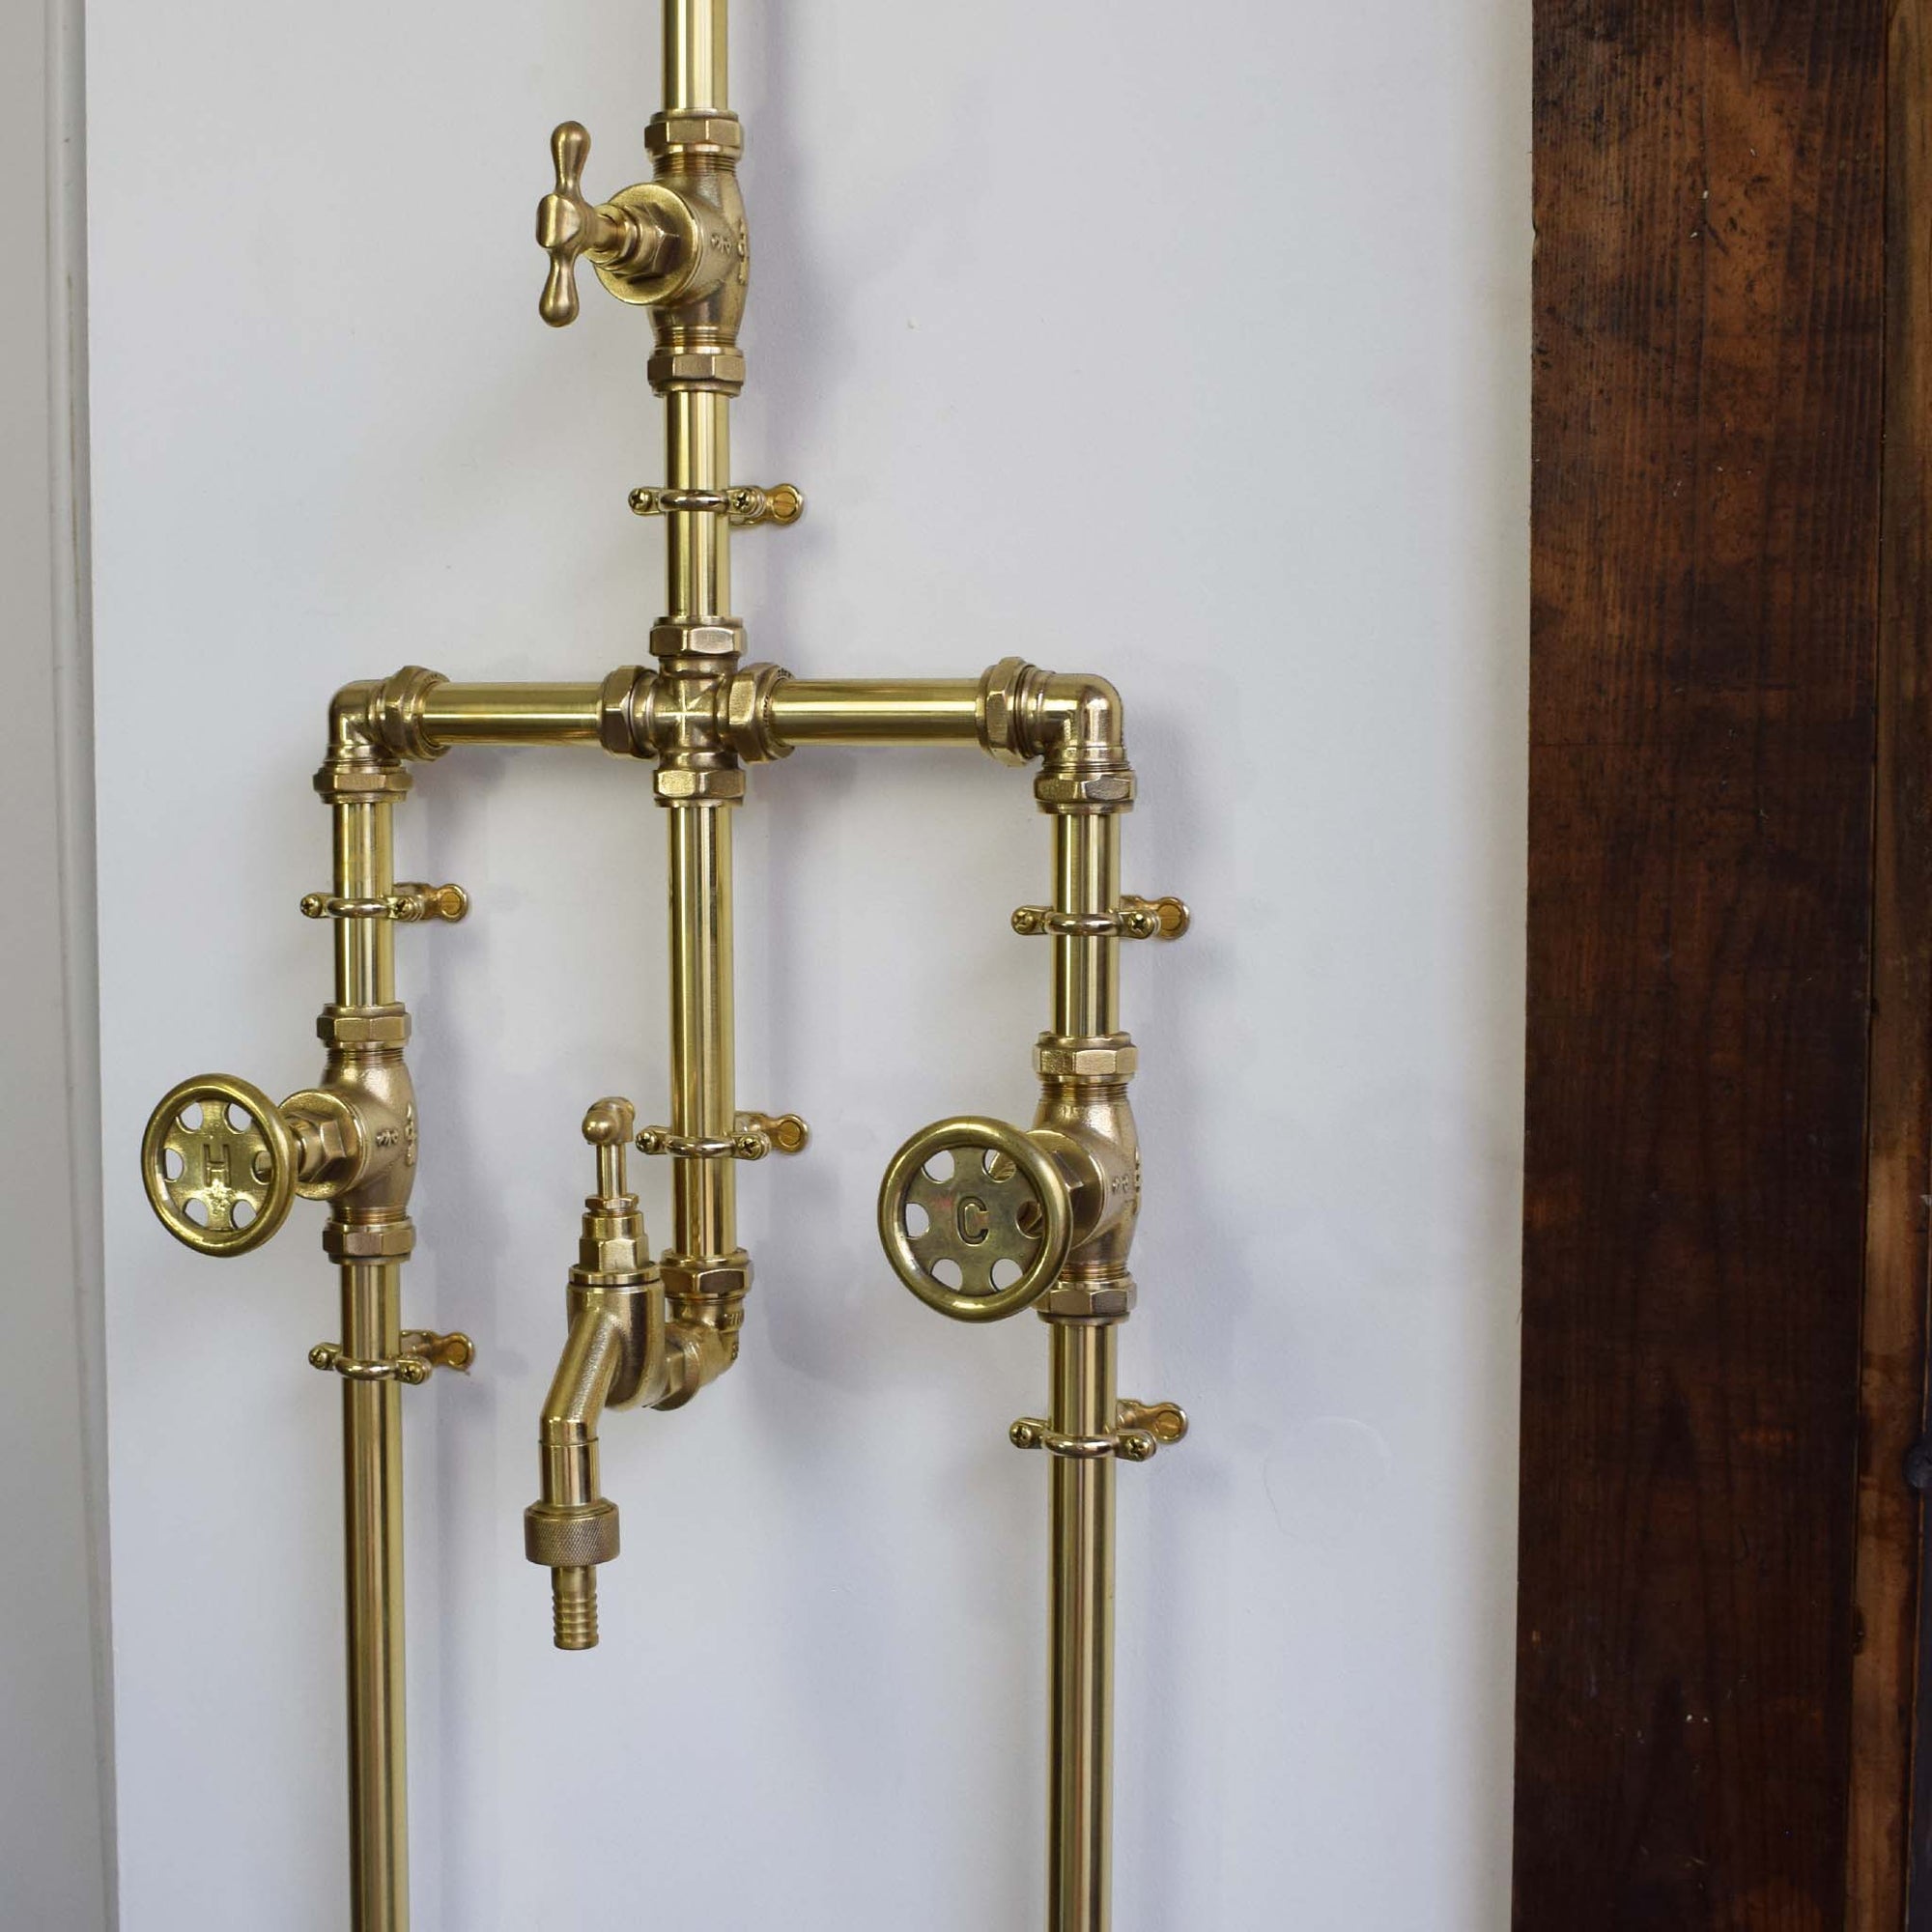 Outdoor brass shower with a versatile design to suit any outdoor living space